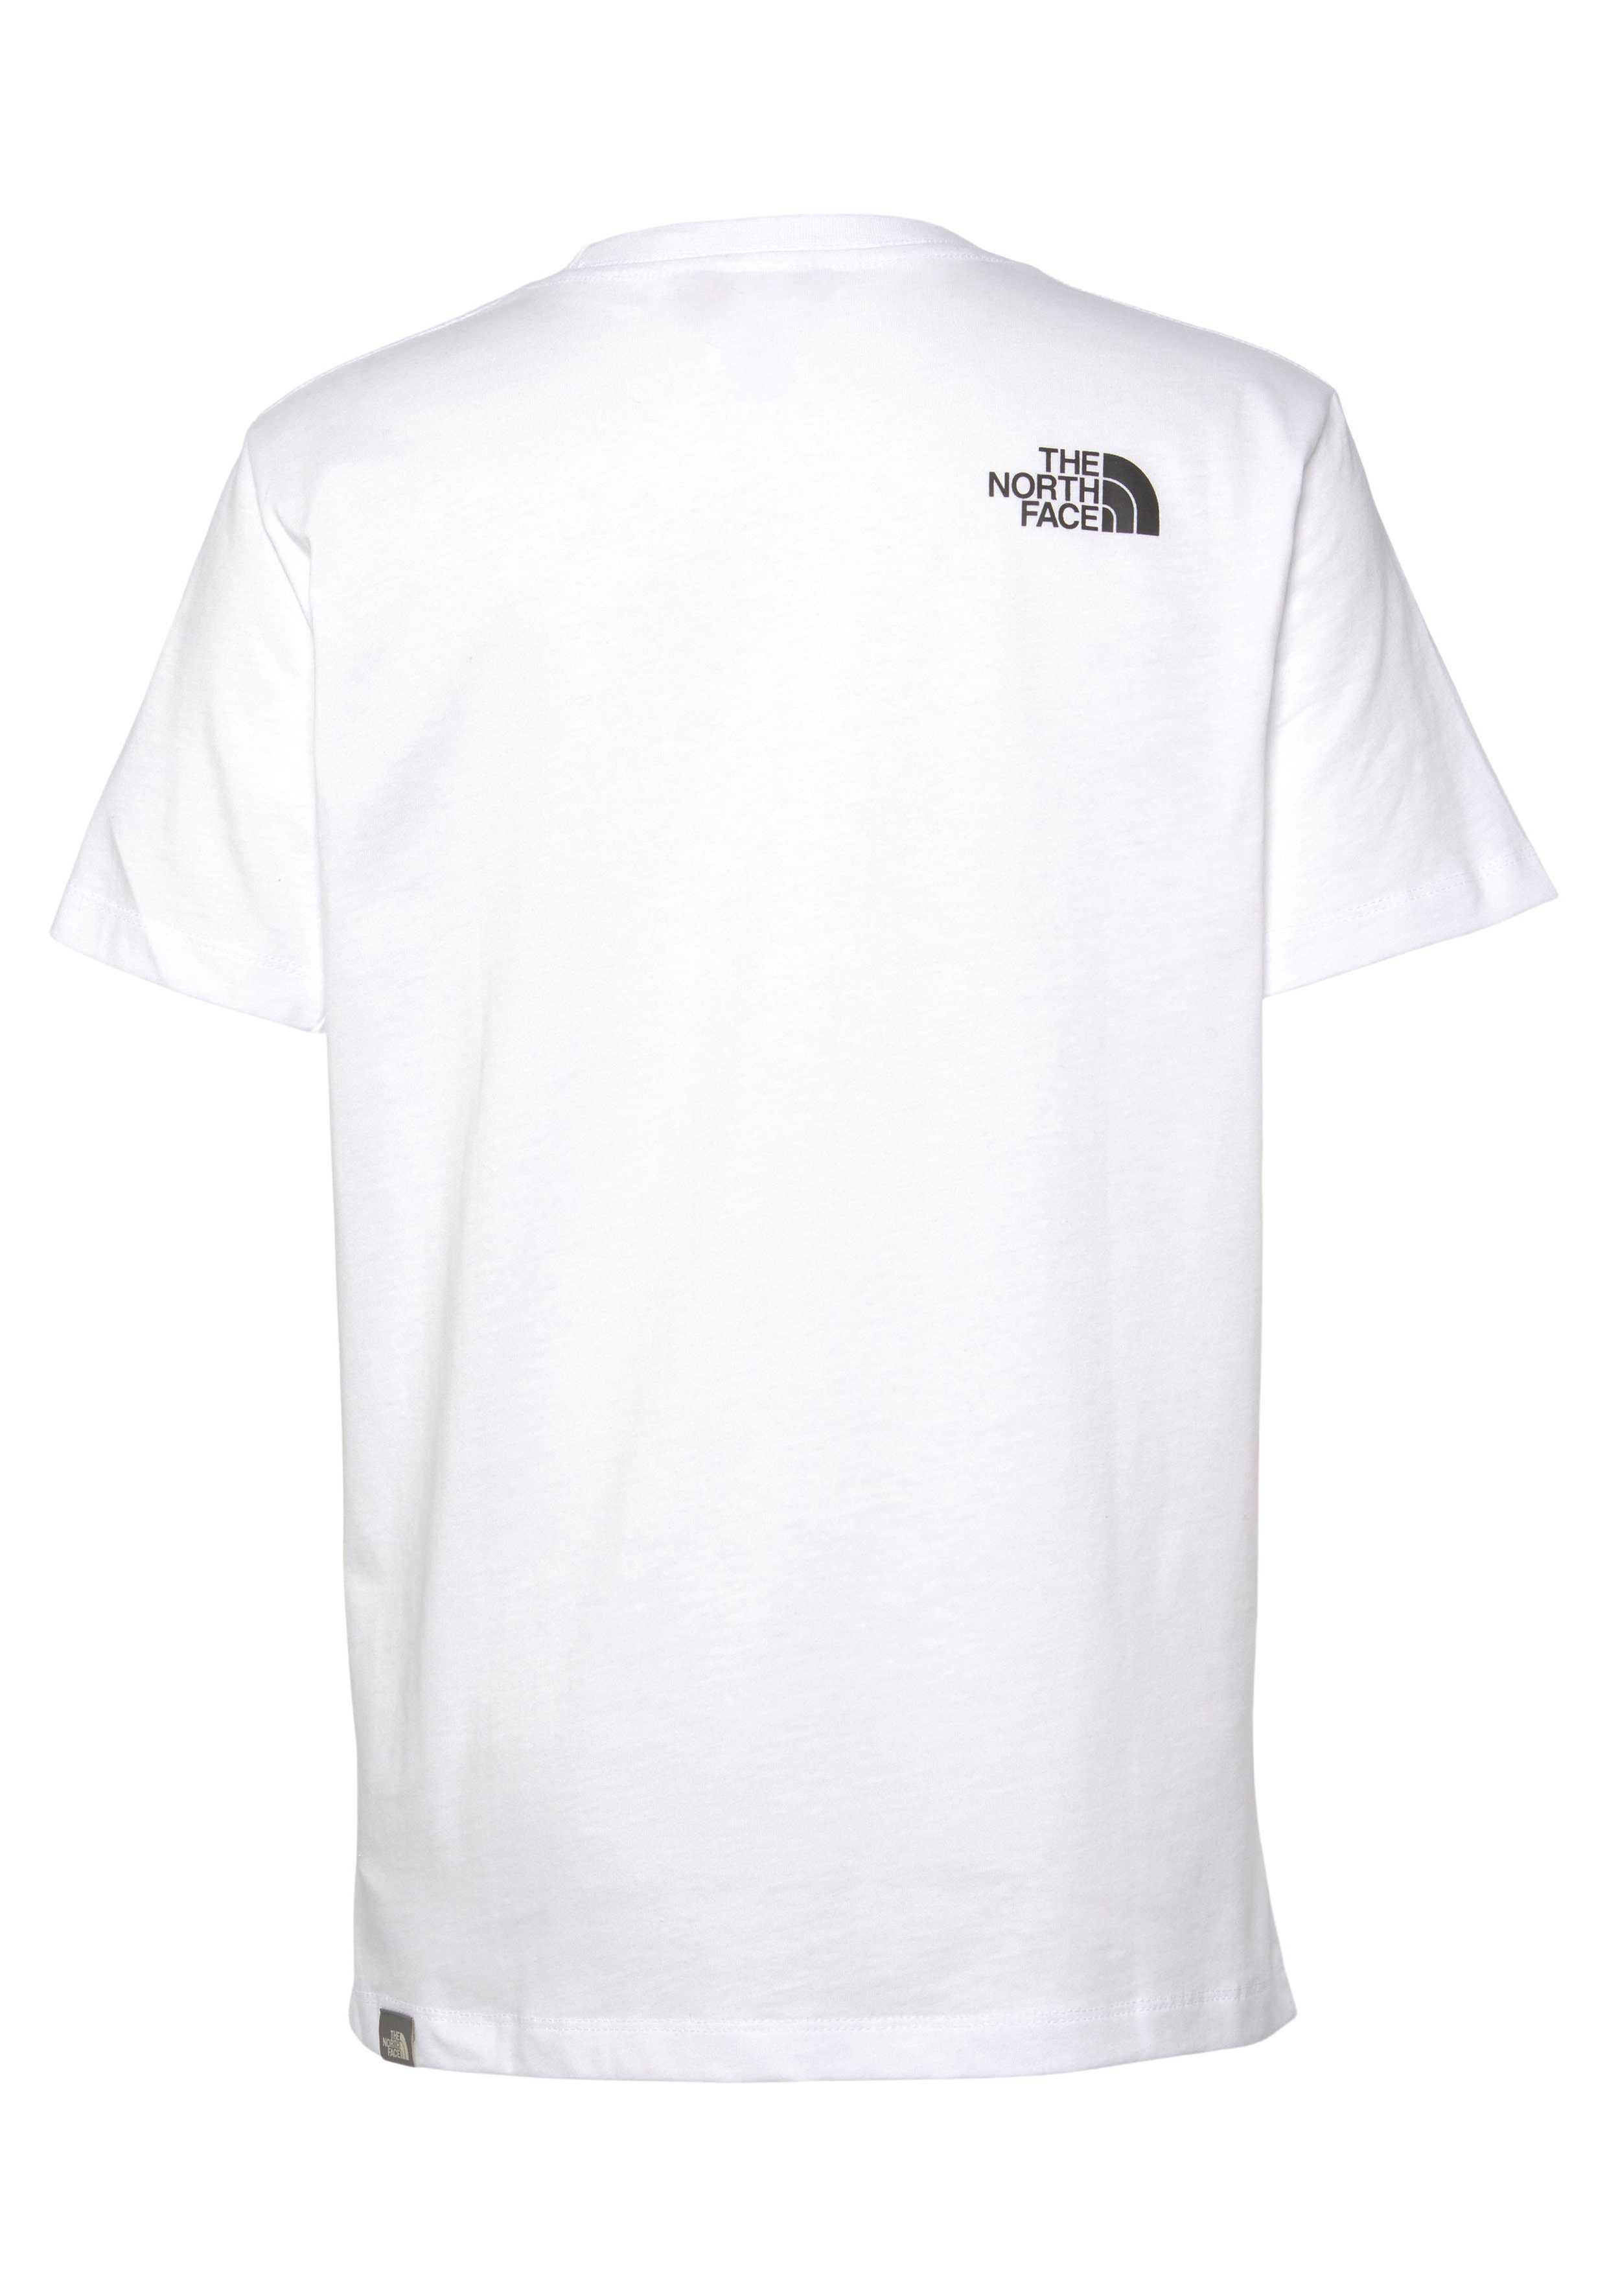 The North Face EASY für Kinder - white TEE T-Shirt